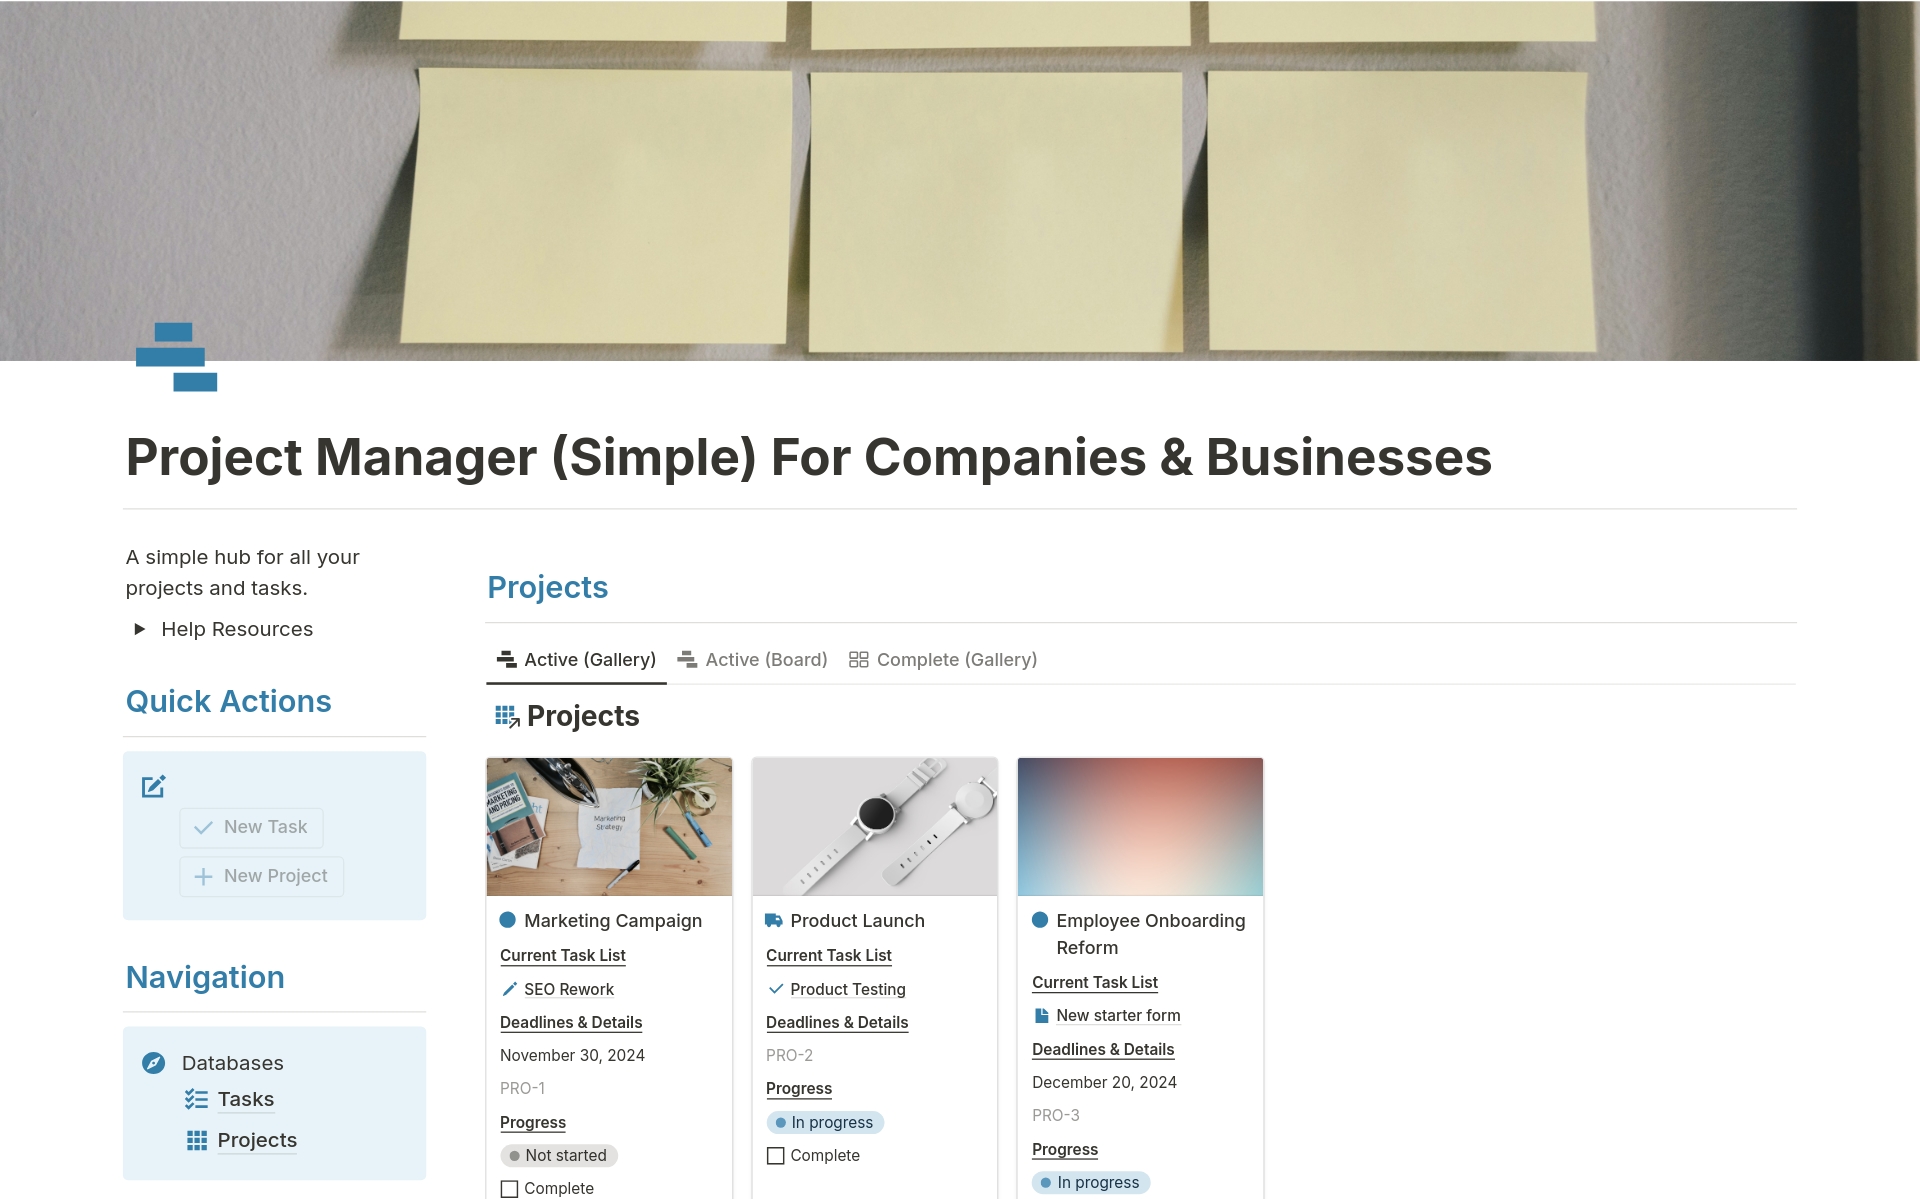 Project Manager For Companies & Business (Simple)のテンプレートのプレビュー